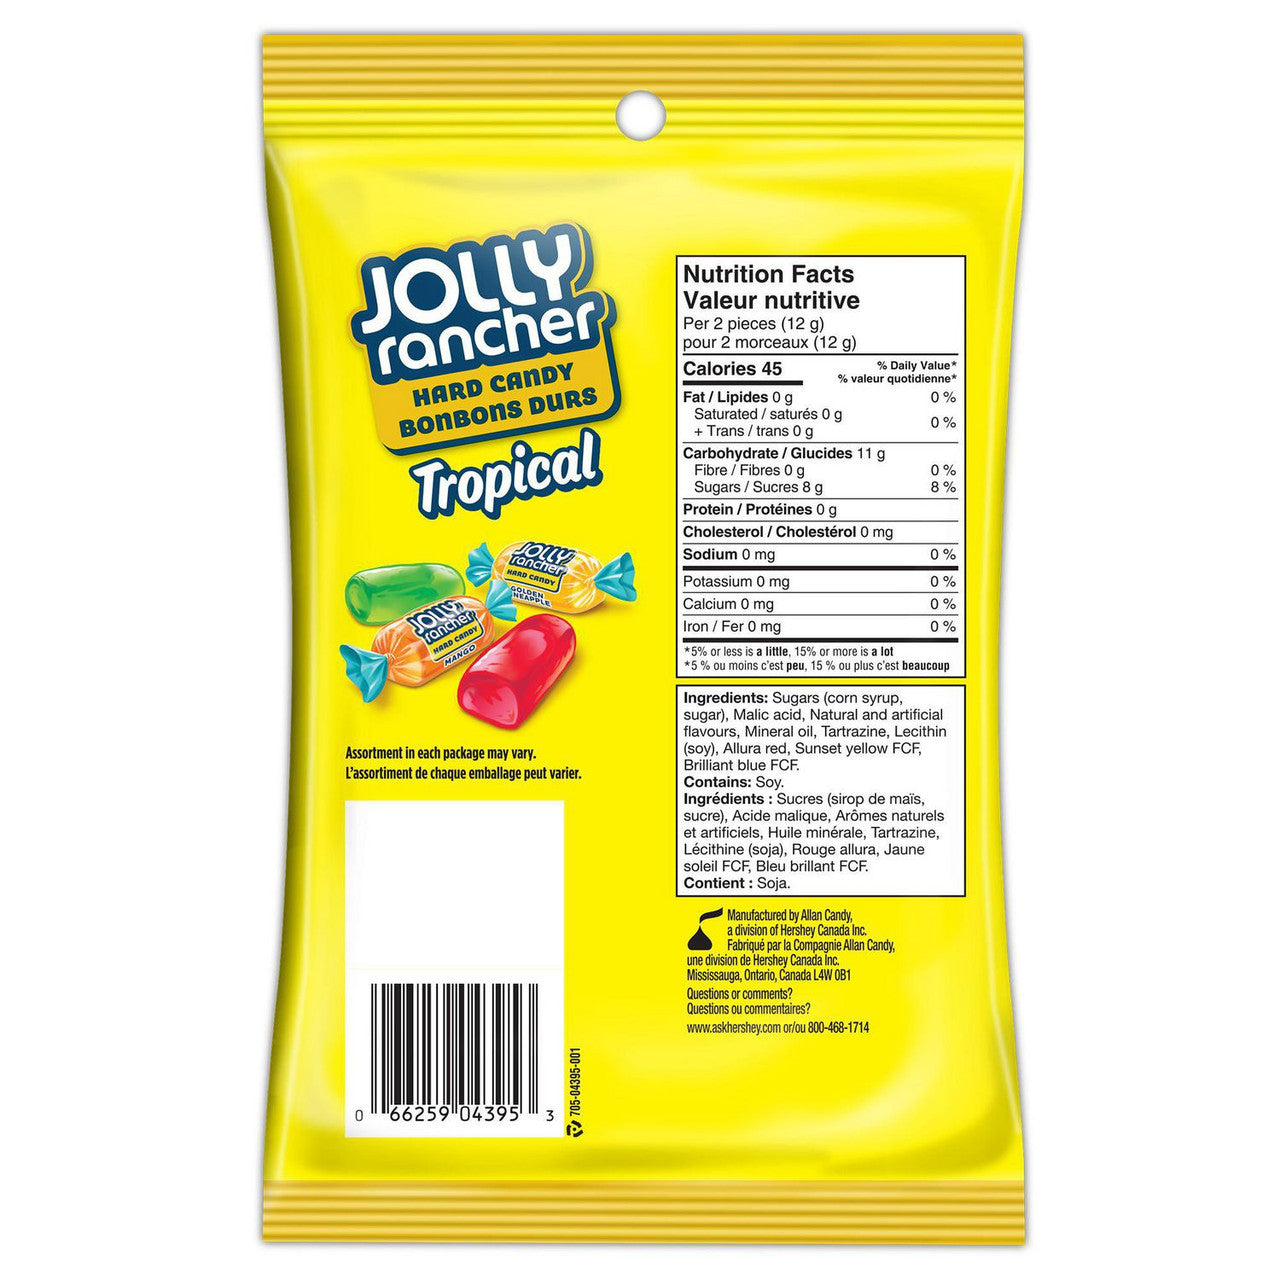 JOLLY RANCHER Tropical Hard Candy, 198g/7 oz., (2 Pack) {Imported from Canada}